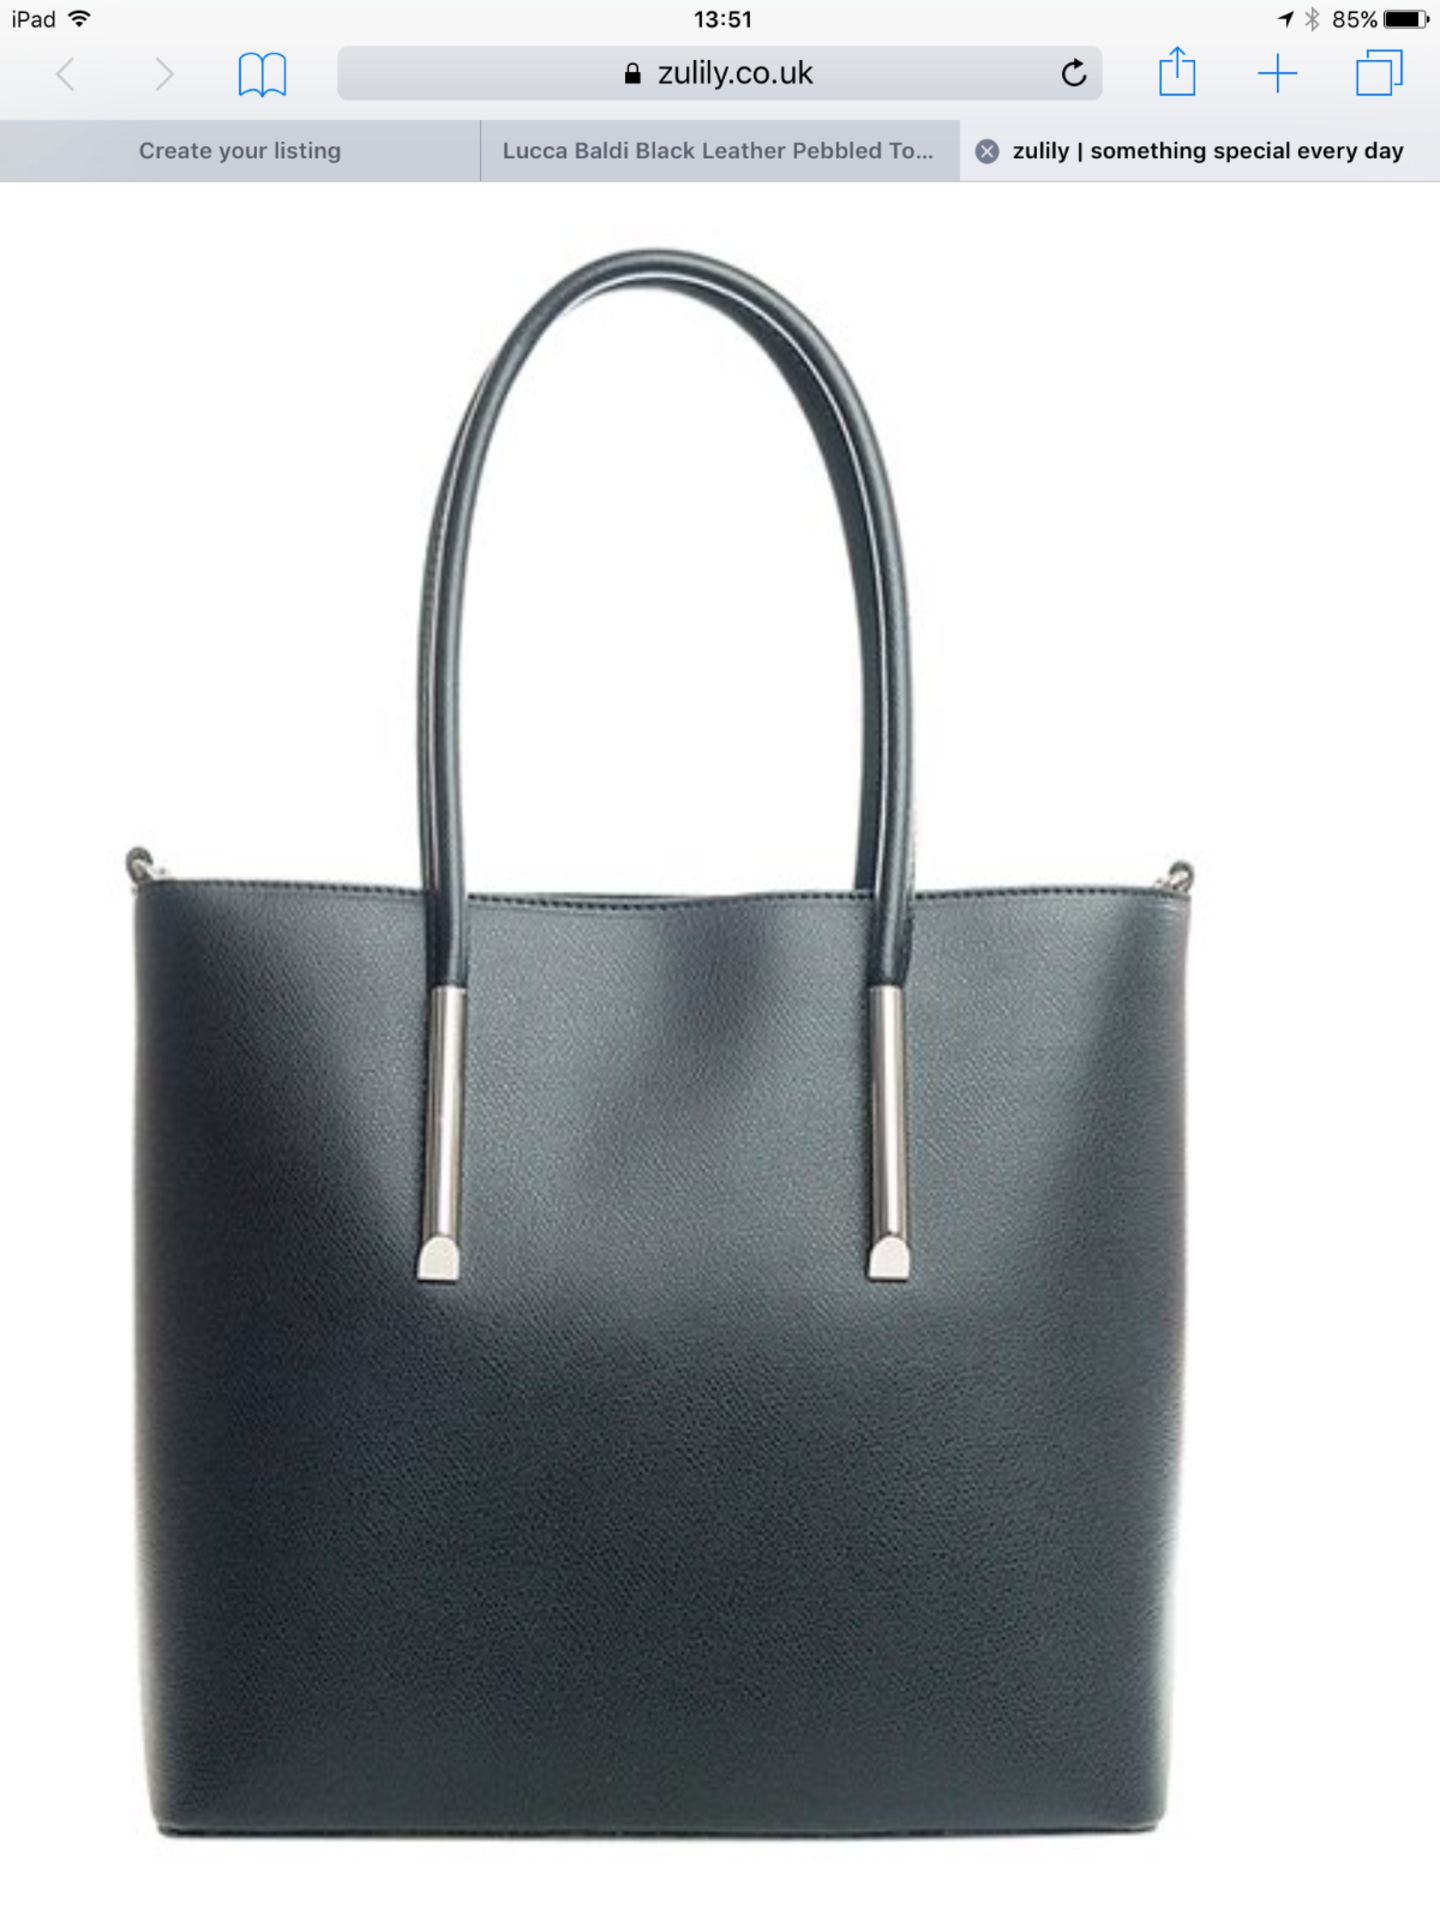 Lucca Baldi Black Leather Pebbled Tote (New with tags) [Ref: 45914641- T-101]